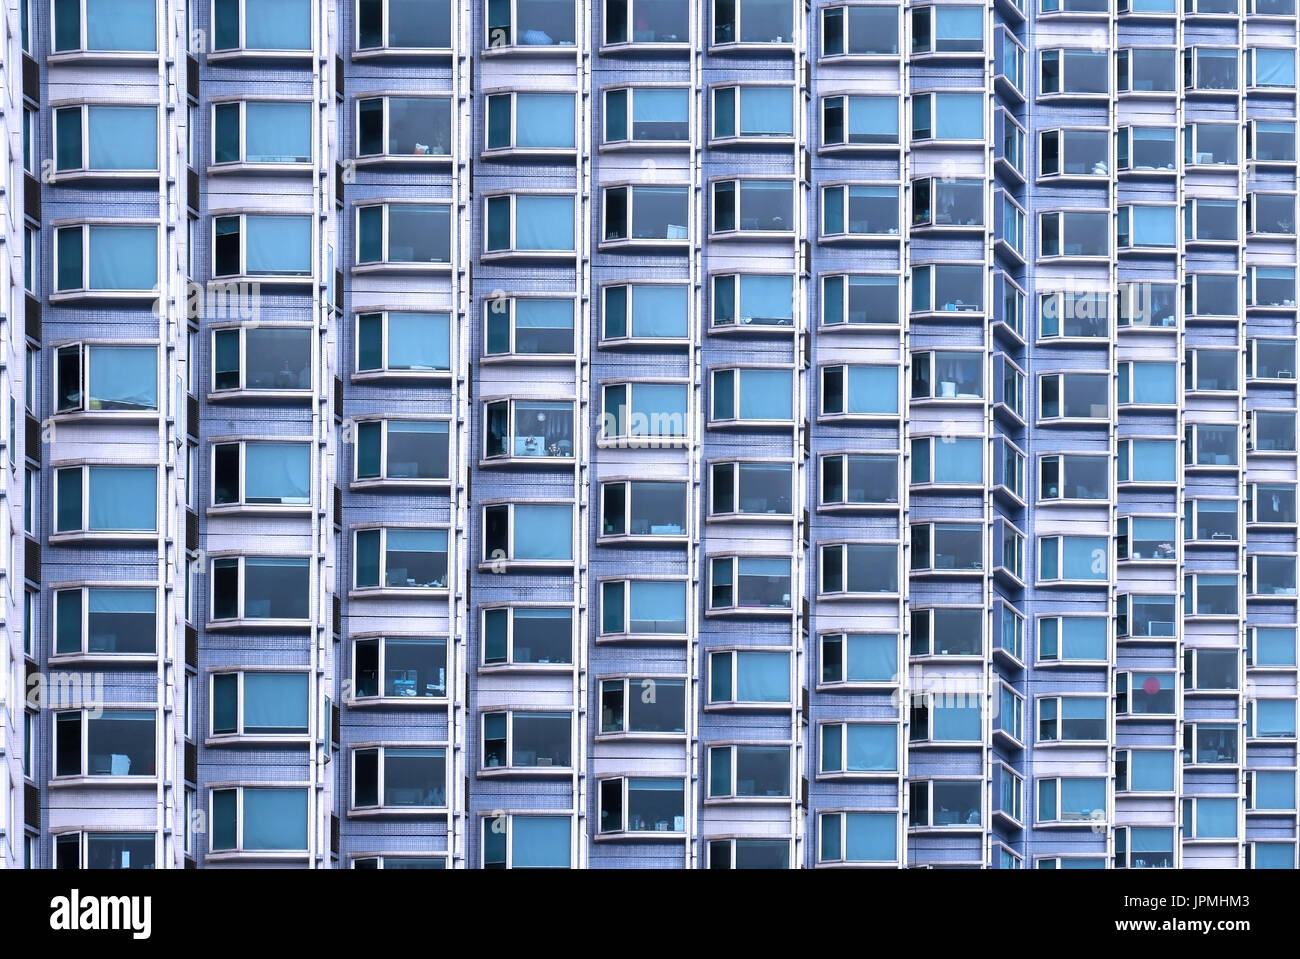 Small blue windows pattern on large building facade Stock Photo